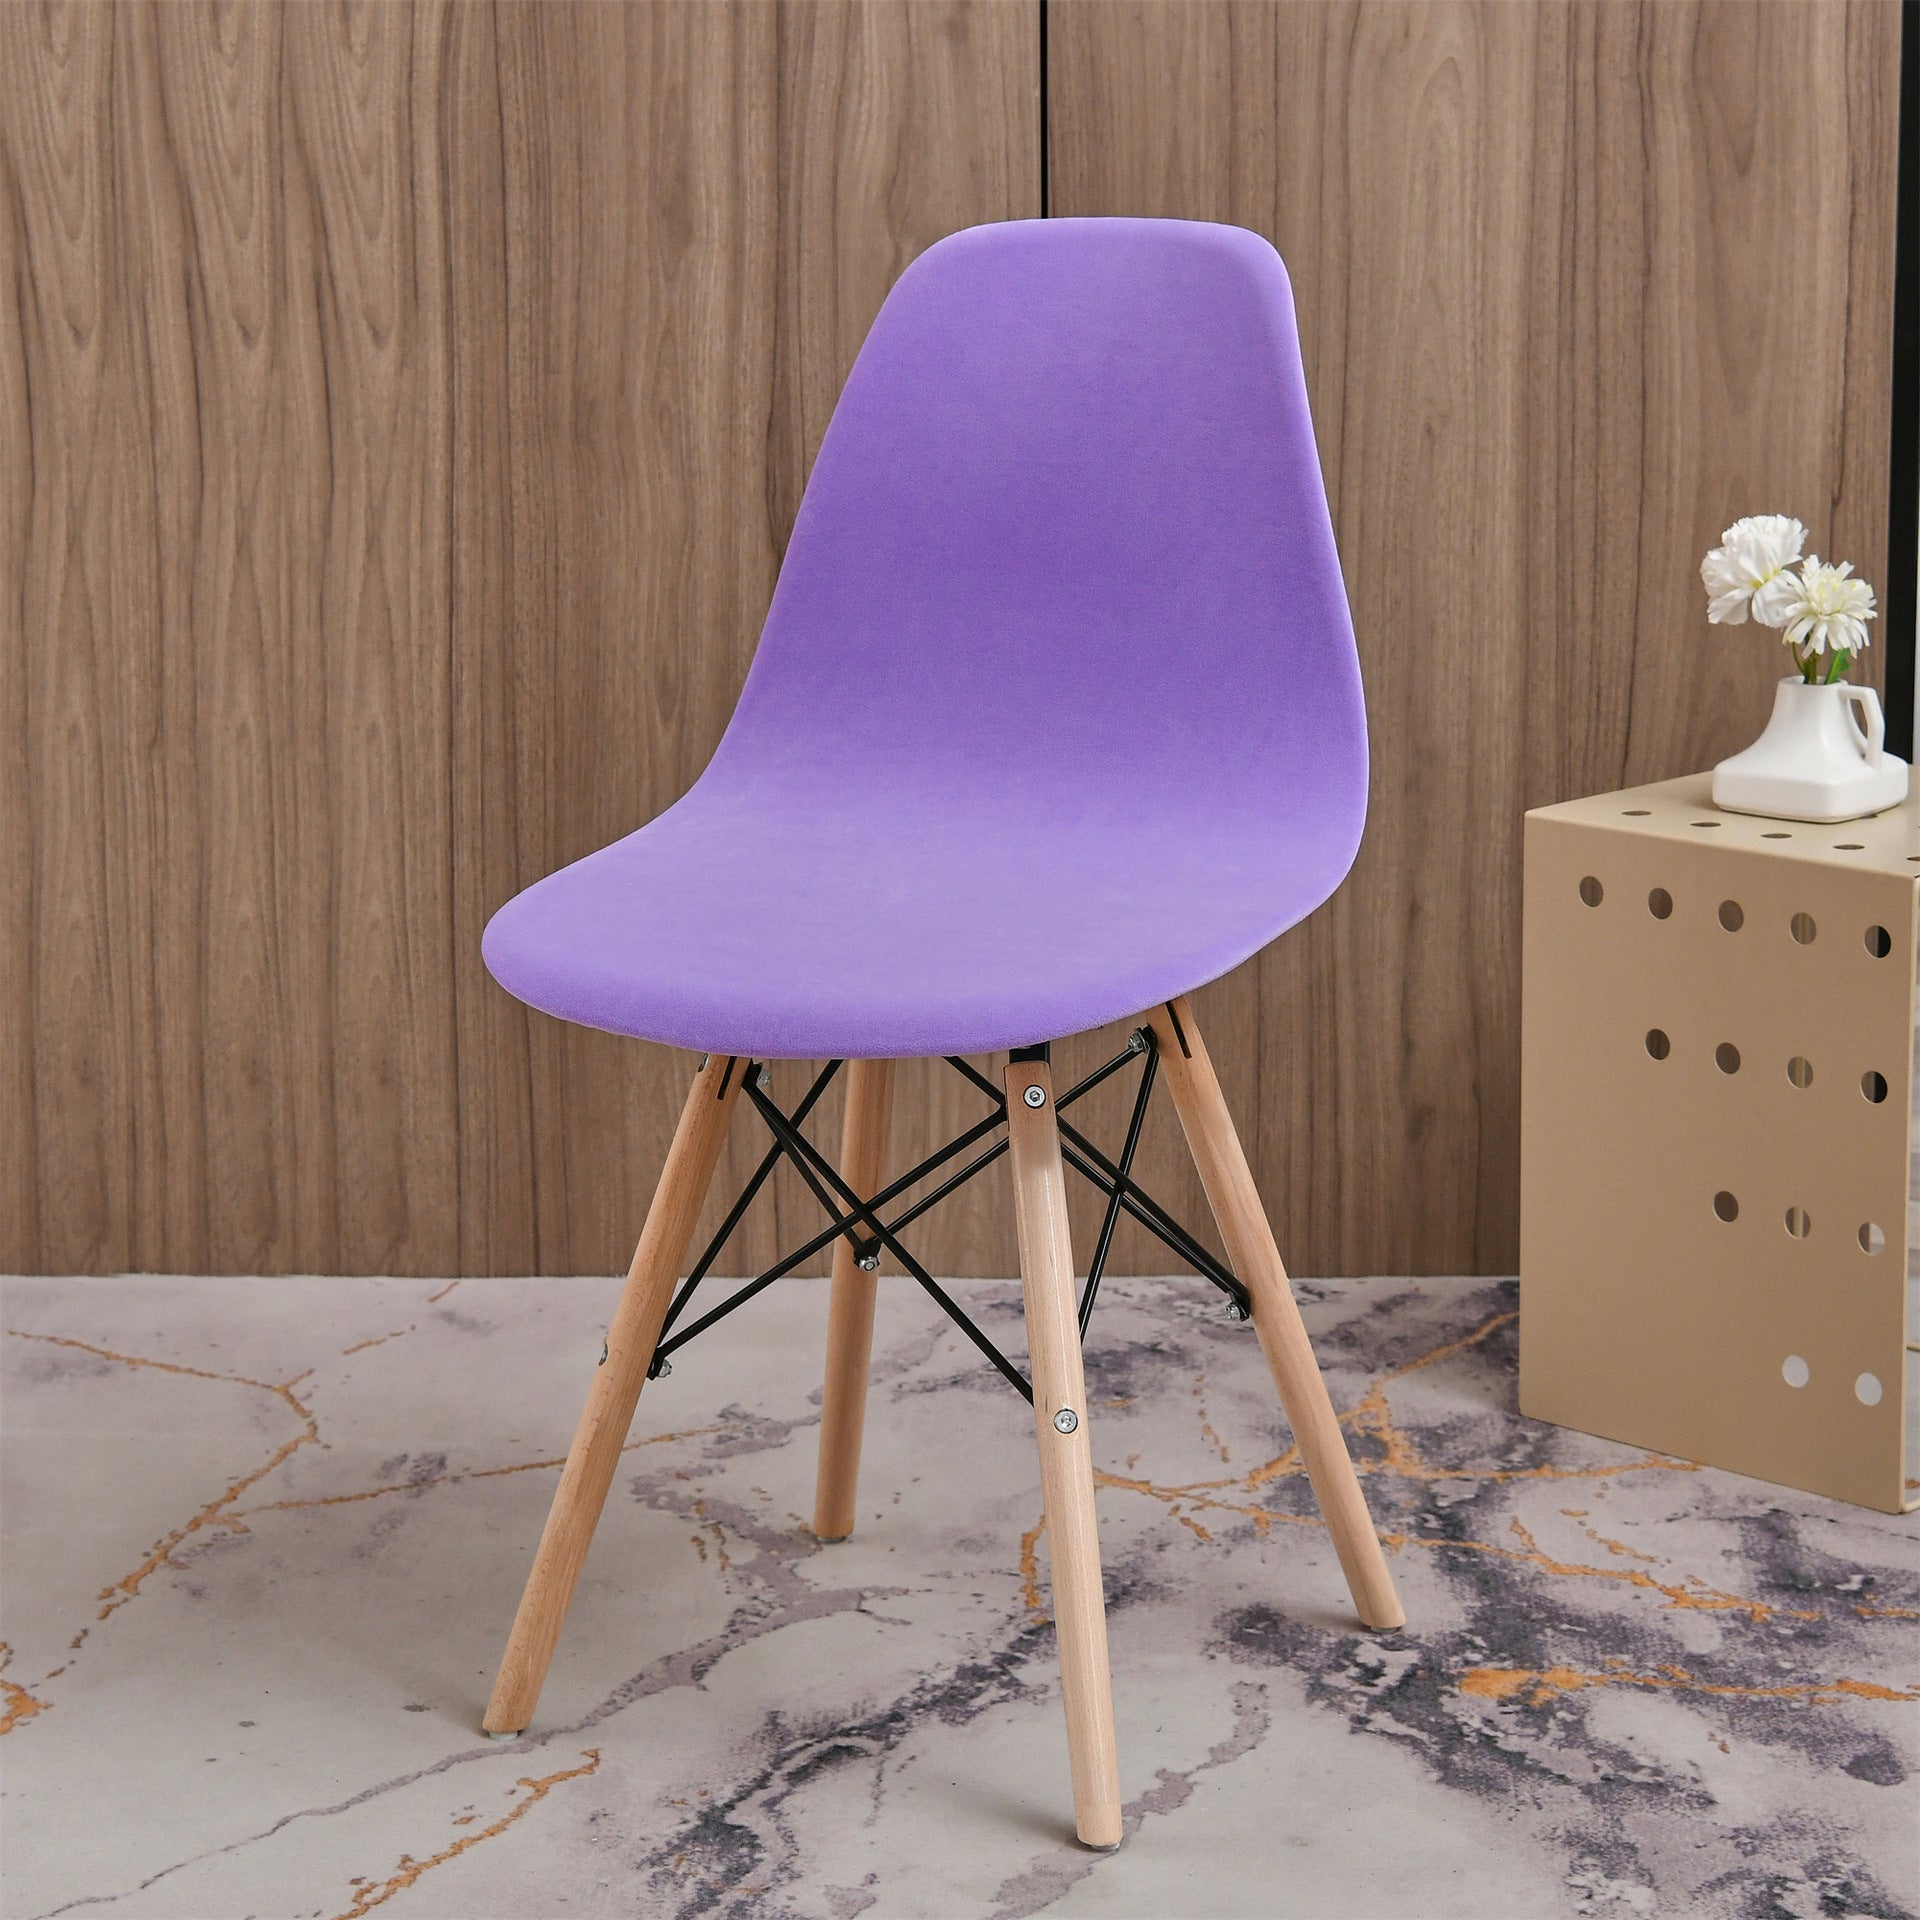 Bulk Stretch Shell Chair Cover Velvet Washable Mid Century Modern Chair Covers for Dining Living Room Bedroom Wholesale